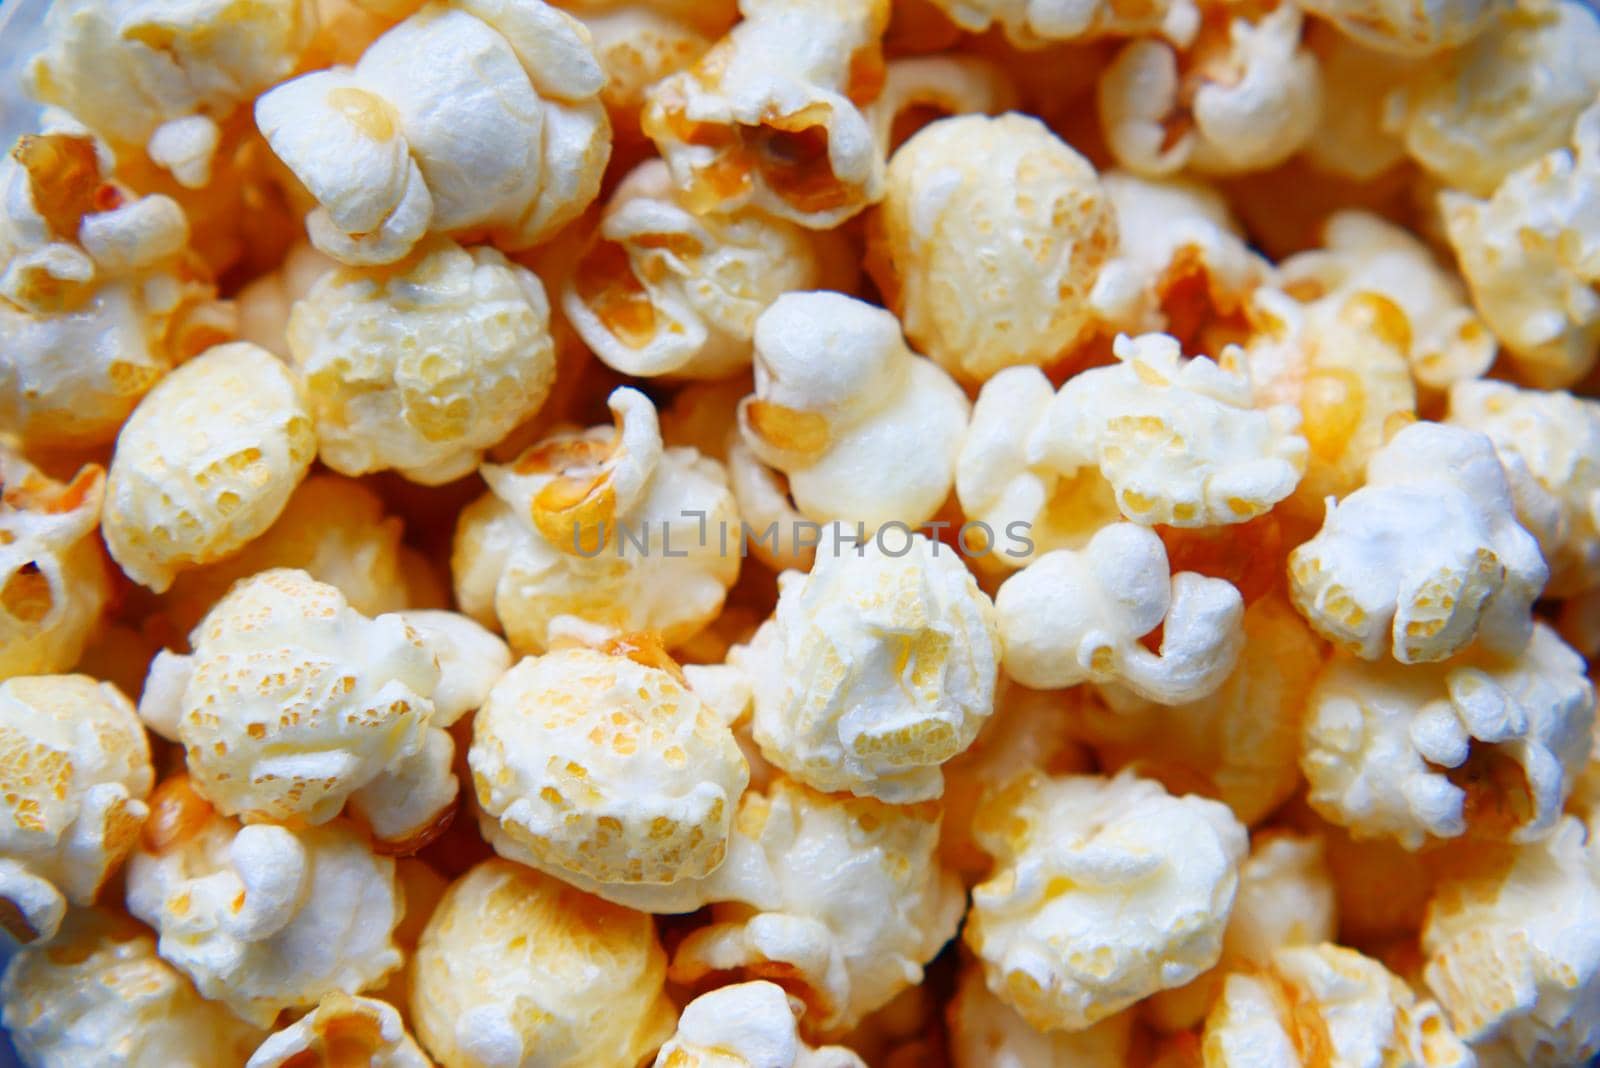 detail shot of popcorn in a bowl on wooden desk by towfiq007